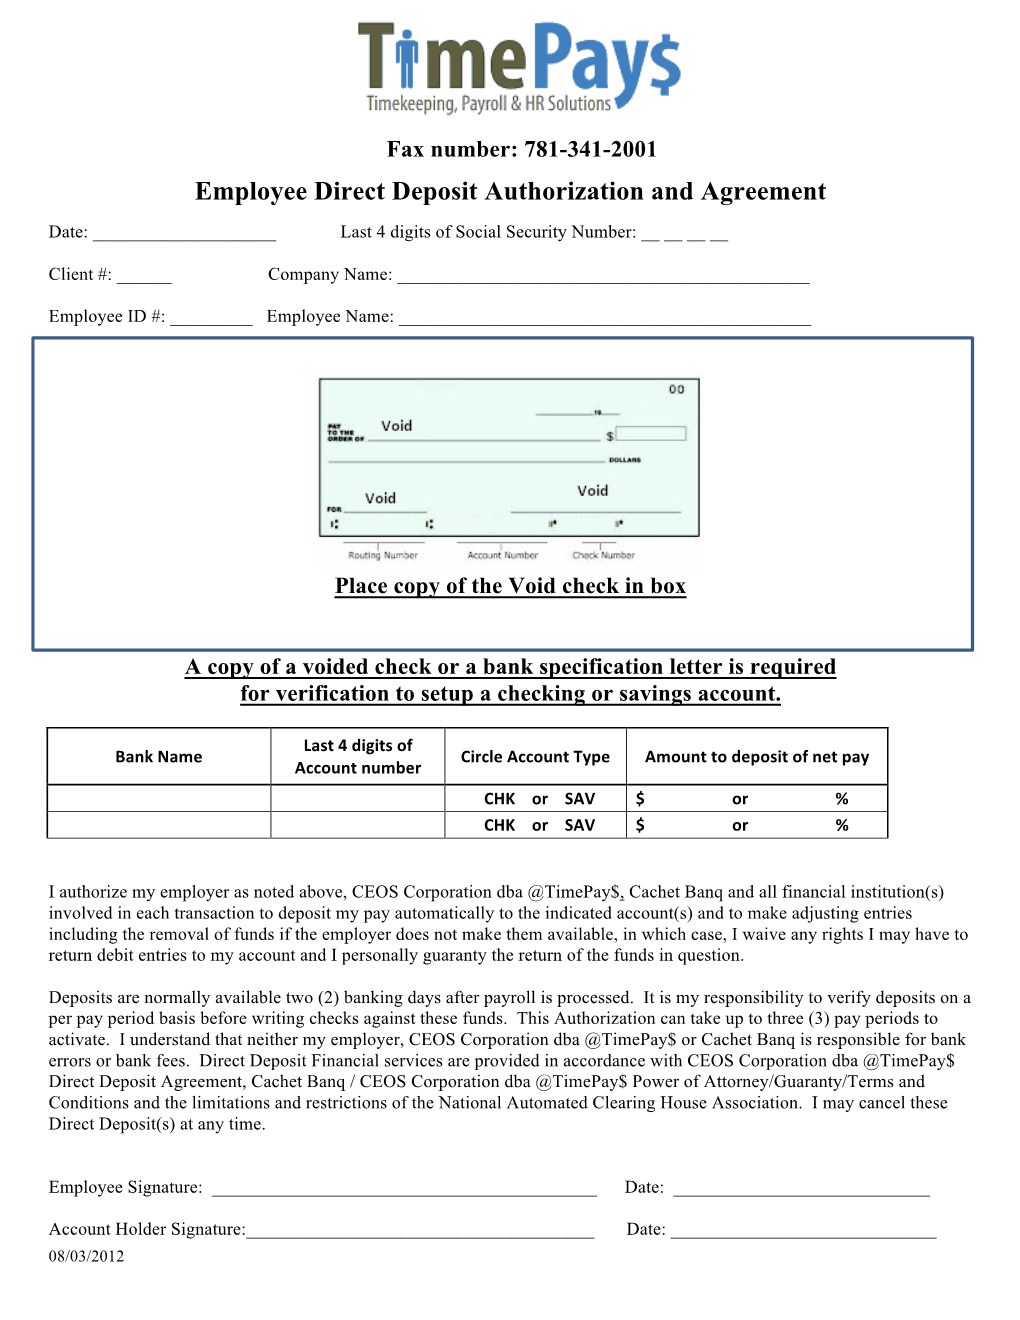 Employee Direct Deposit Authorization and Agreement